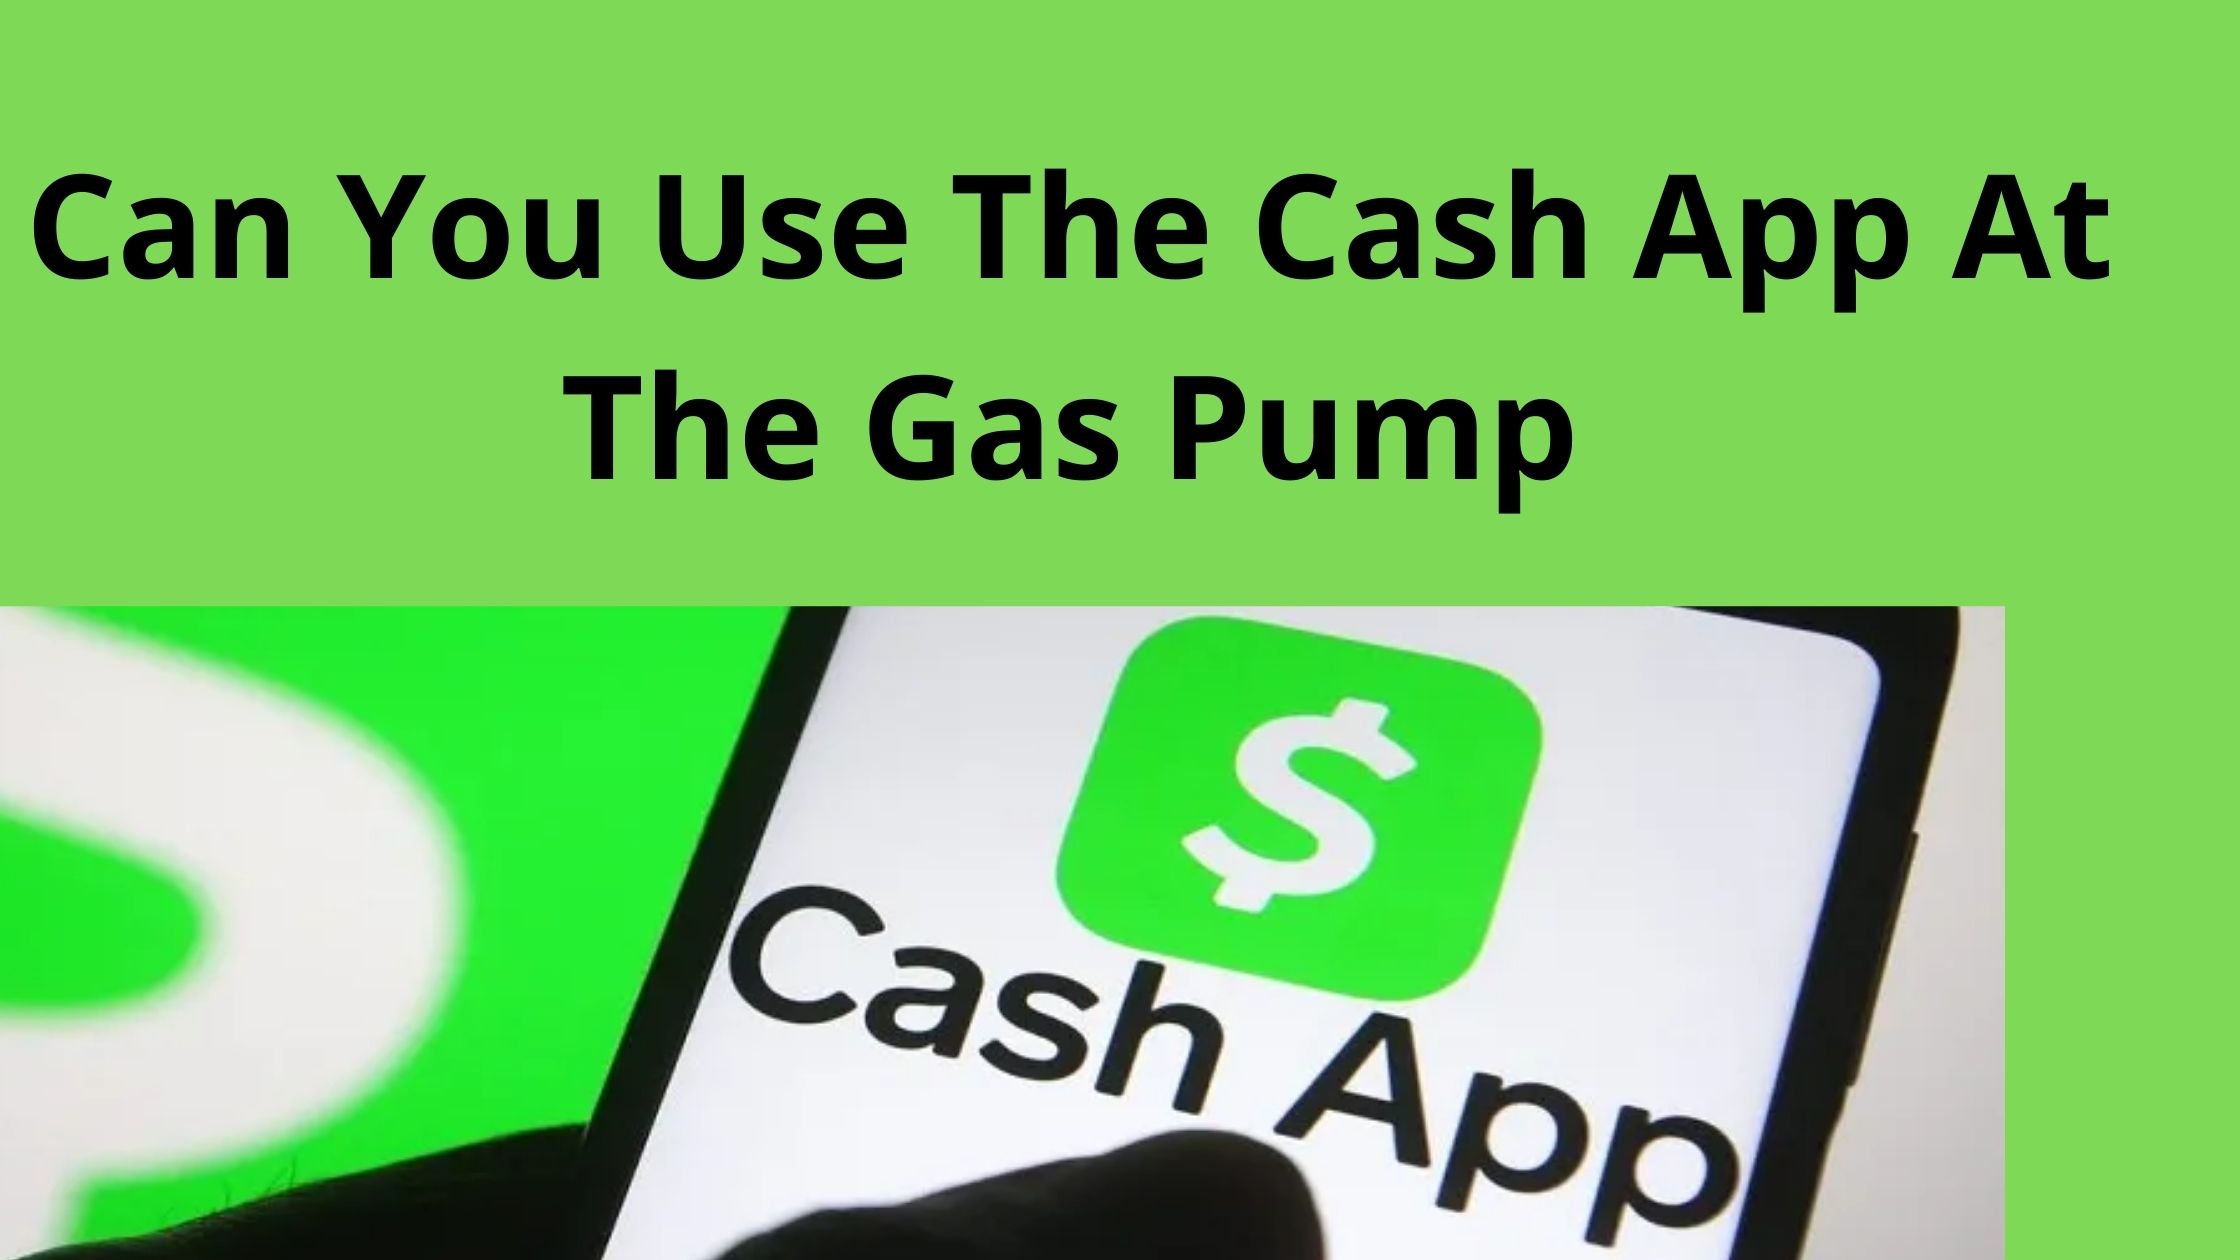 Can You Use The Cash App At The Gas Pump, Yes, Get Details Below